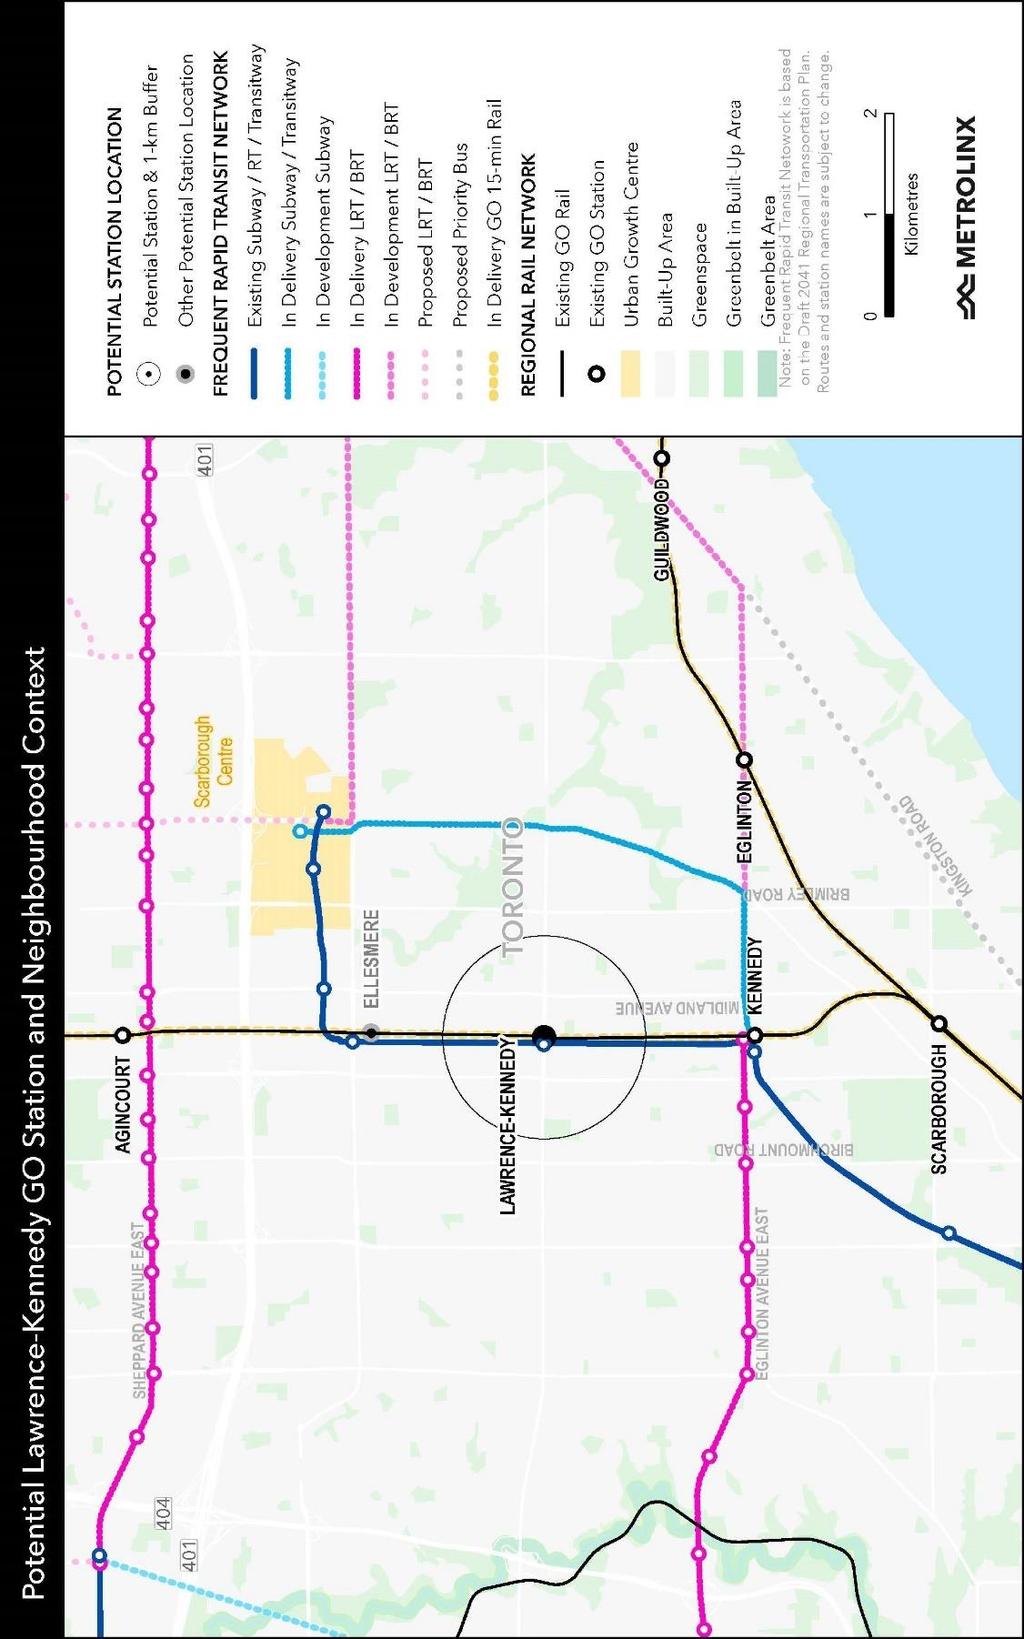 9.4 Proposed GO Station and Neighbourhood Context Area